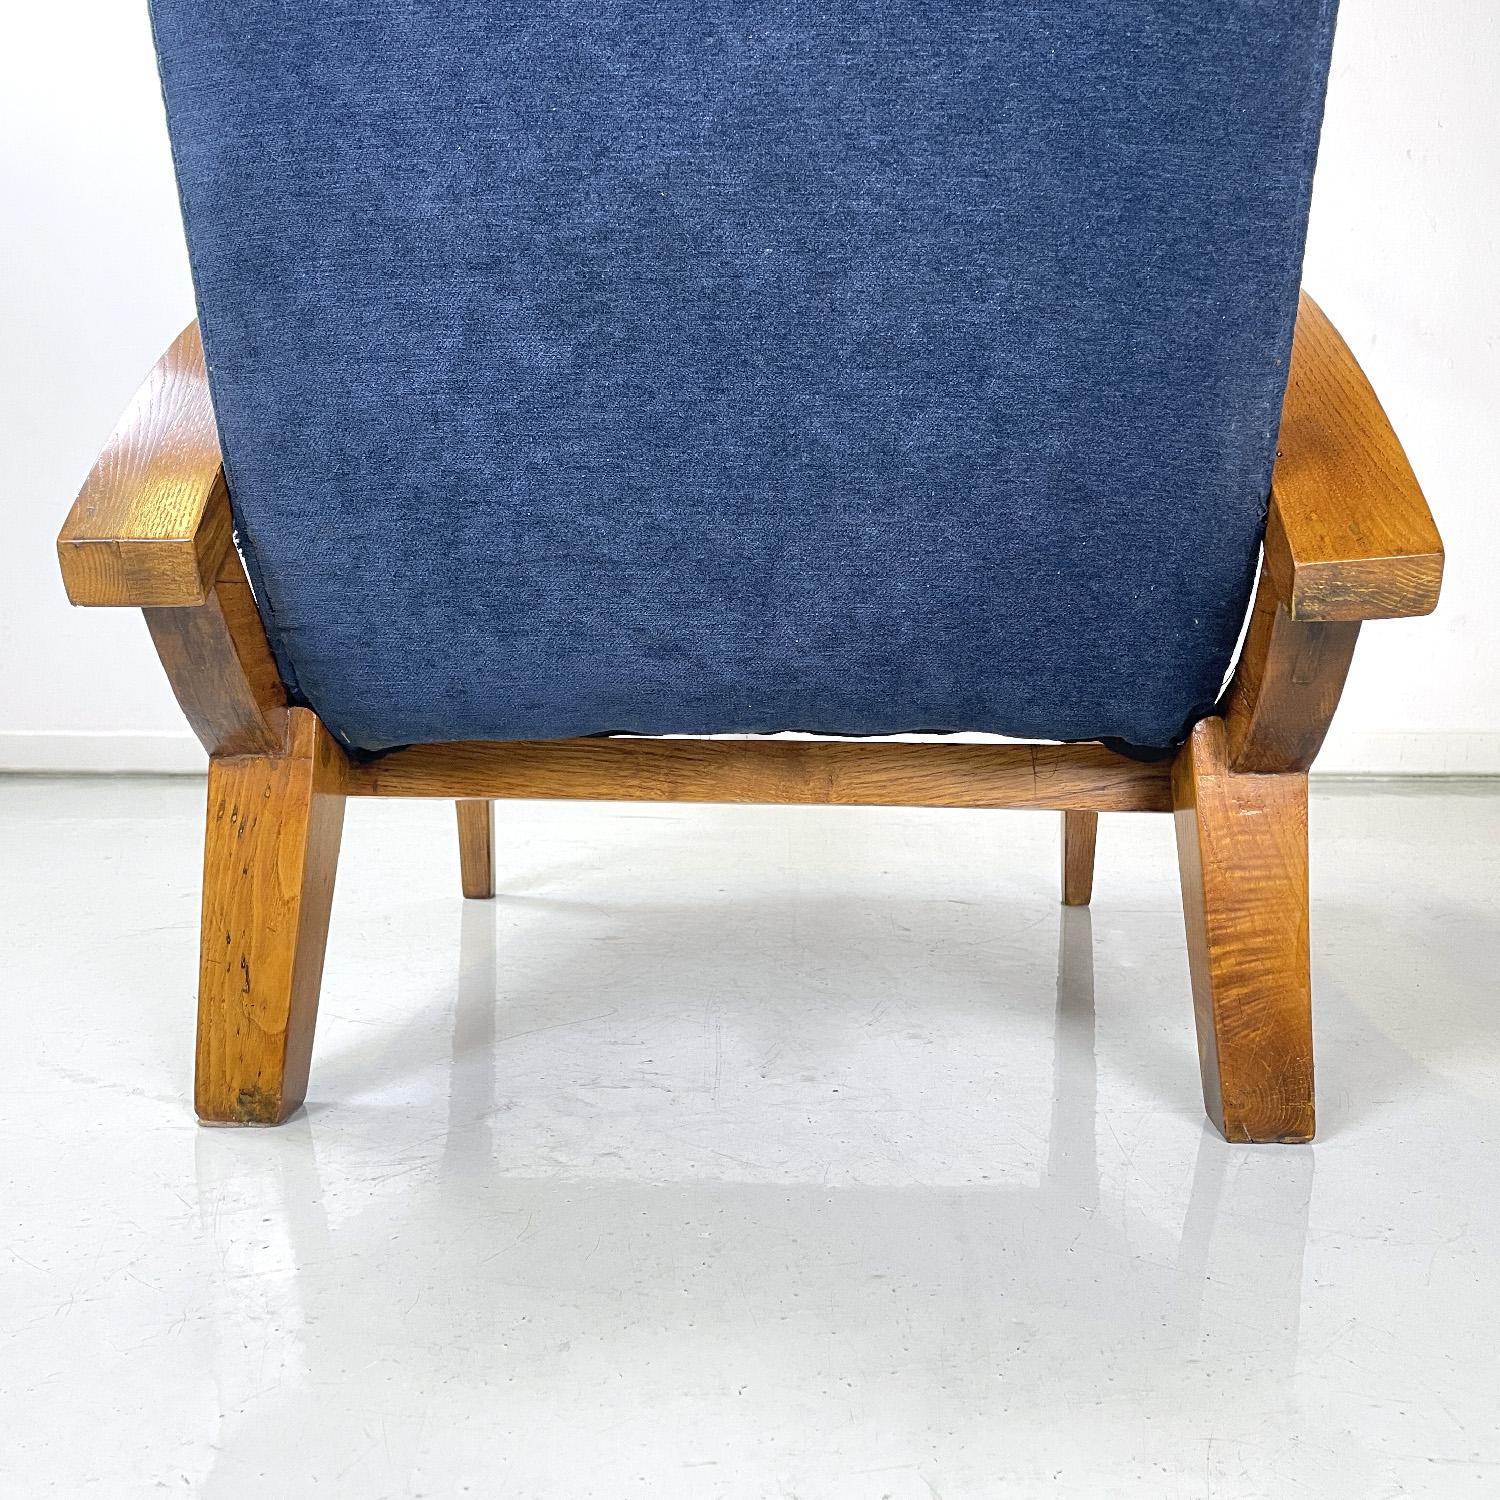 Italian mid-century modern wood and blue fabric armchairs, 1950s For Sale 2